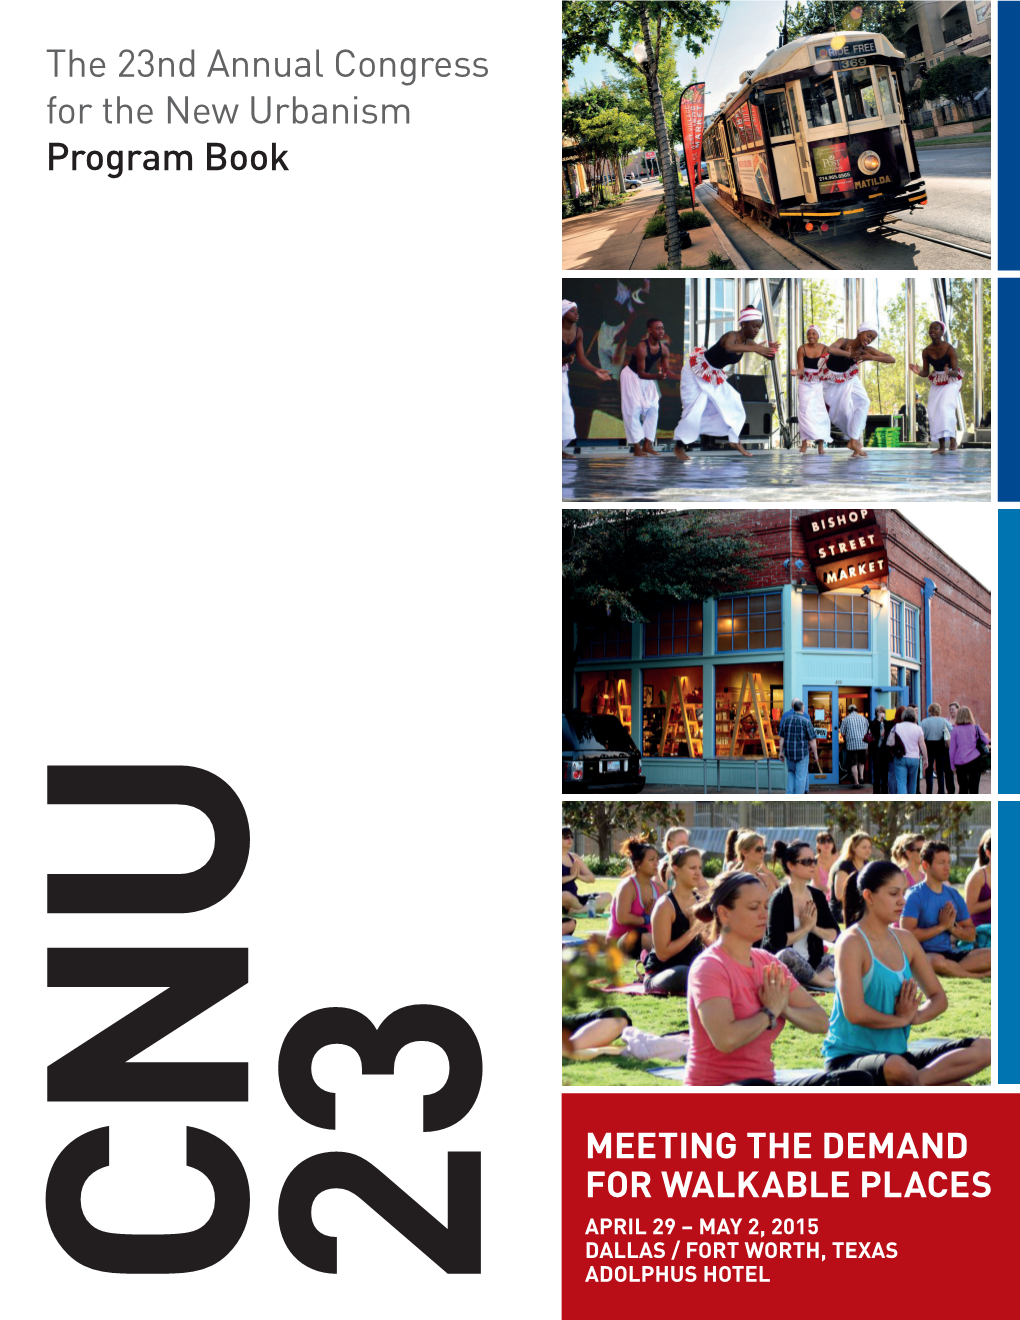 The 23Nd Annual Congress for the New Urbanism Program Book